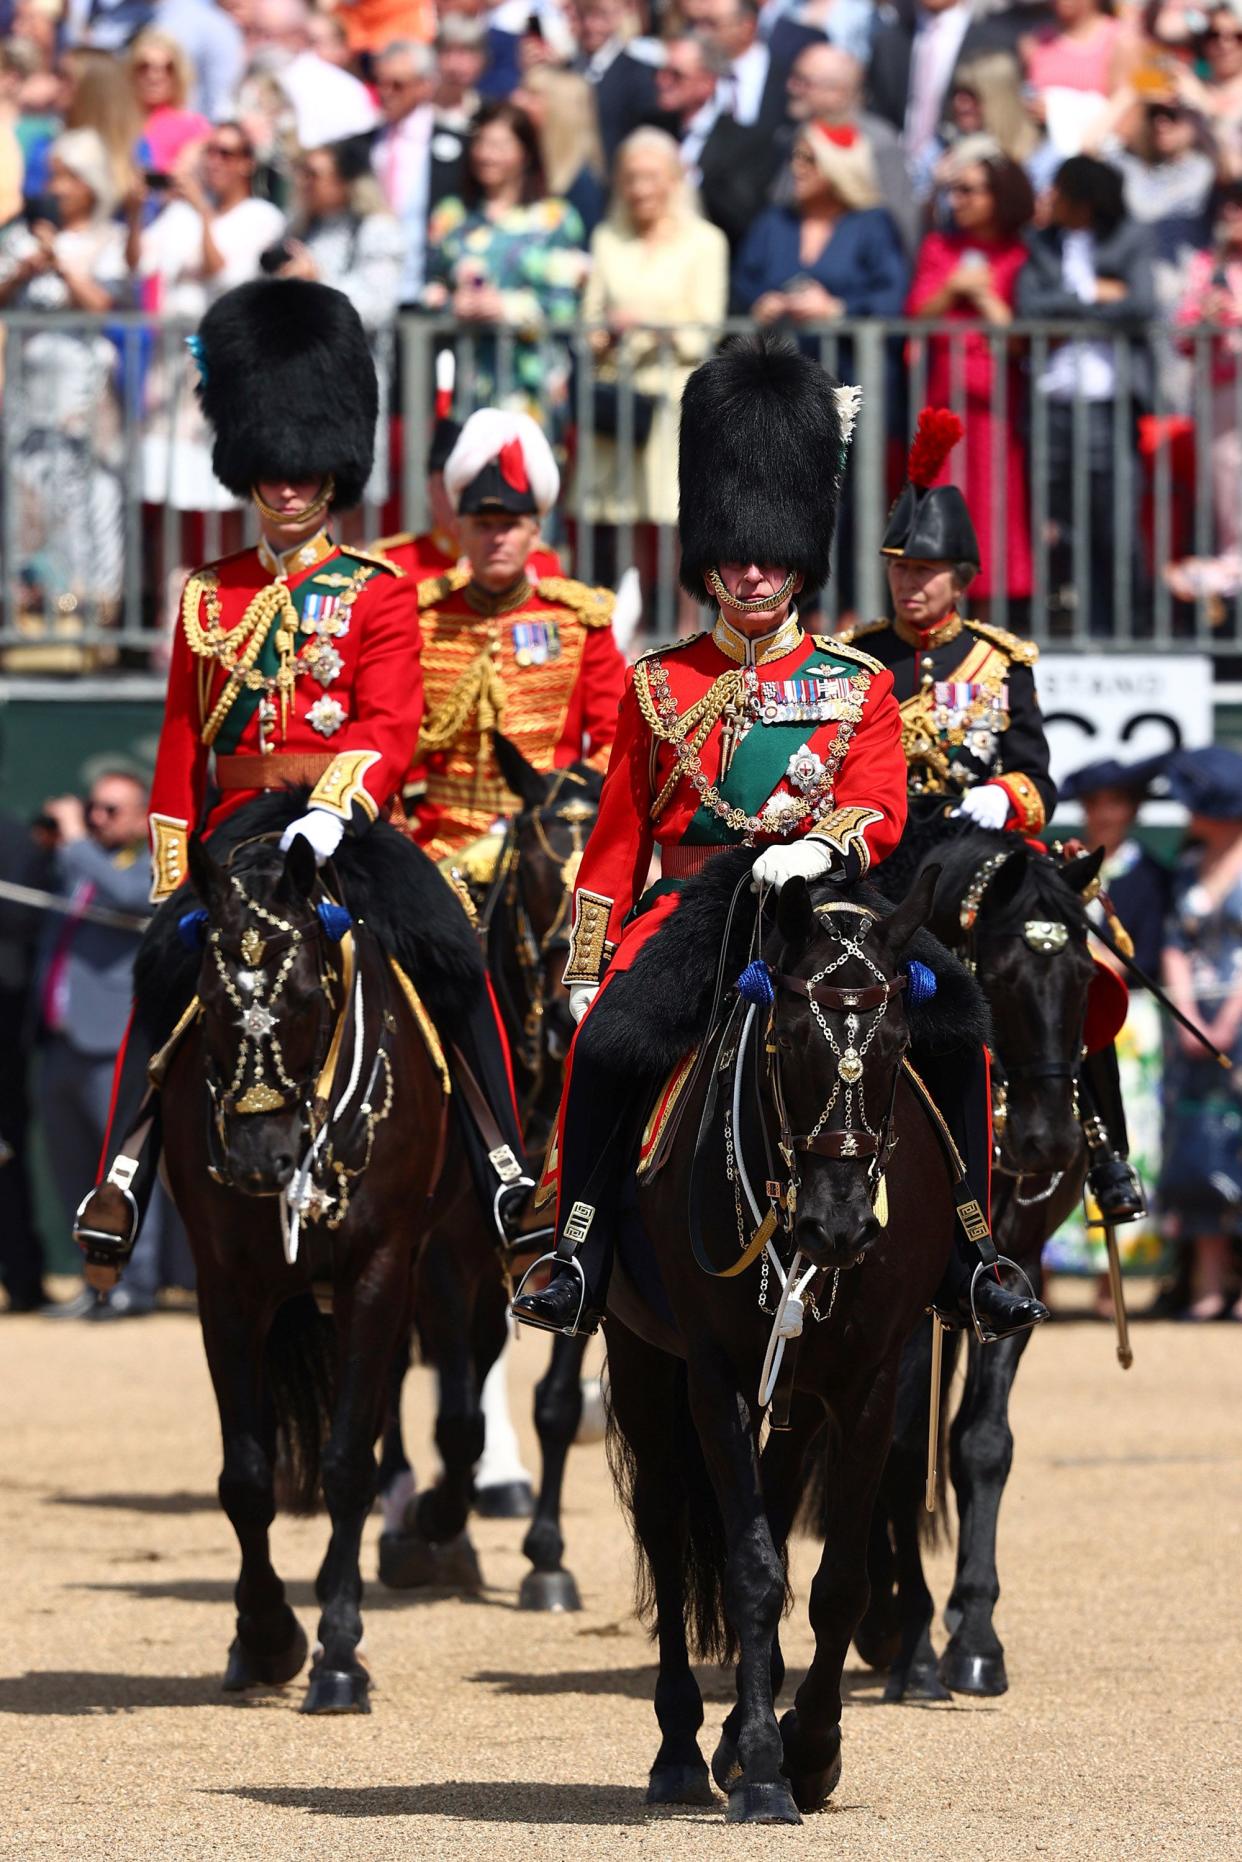 Prince Charles, Prince of Wales, in his role as Colonel of the Welsh Guards, Princess Anne (R), Princess Royal, in her role as Colonel of the Blues and Royals, and Prince William, Duke of Cambridge, (L) in his role as Colonel of the Irish Guards, during the Trooping the Colour parade on June 2, 2022, in London, England. Trooping The Colour, also known as The Queen's Birthday Parade, is a military ceremony performed by regiments of the British Army that has taken place since the mid-17th century. It marks the official birthday of the British Sovereign.